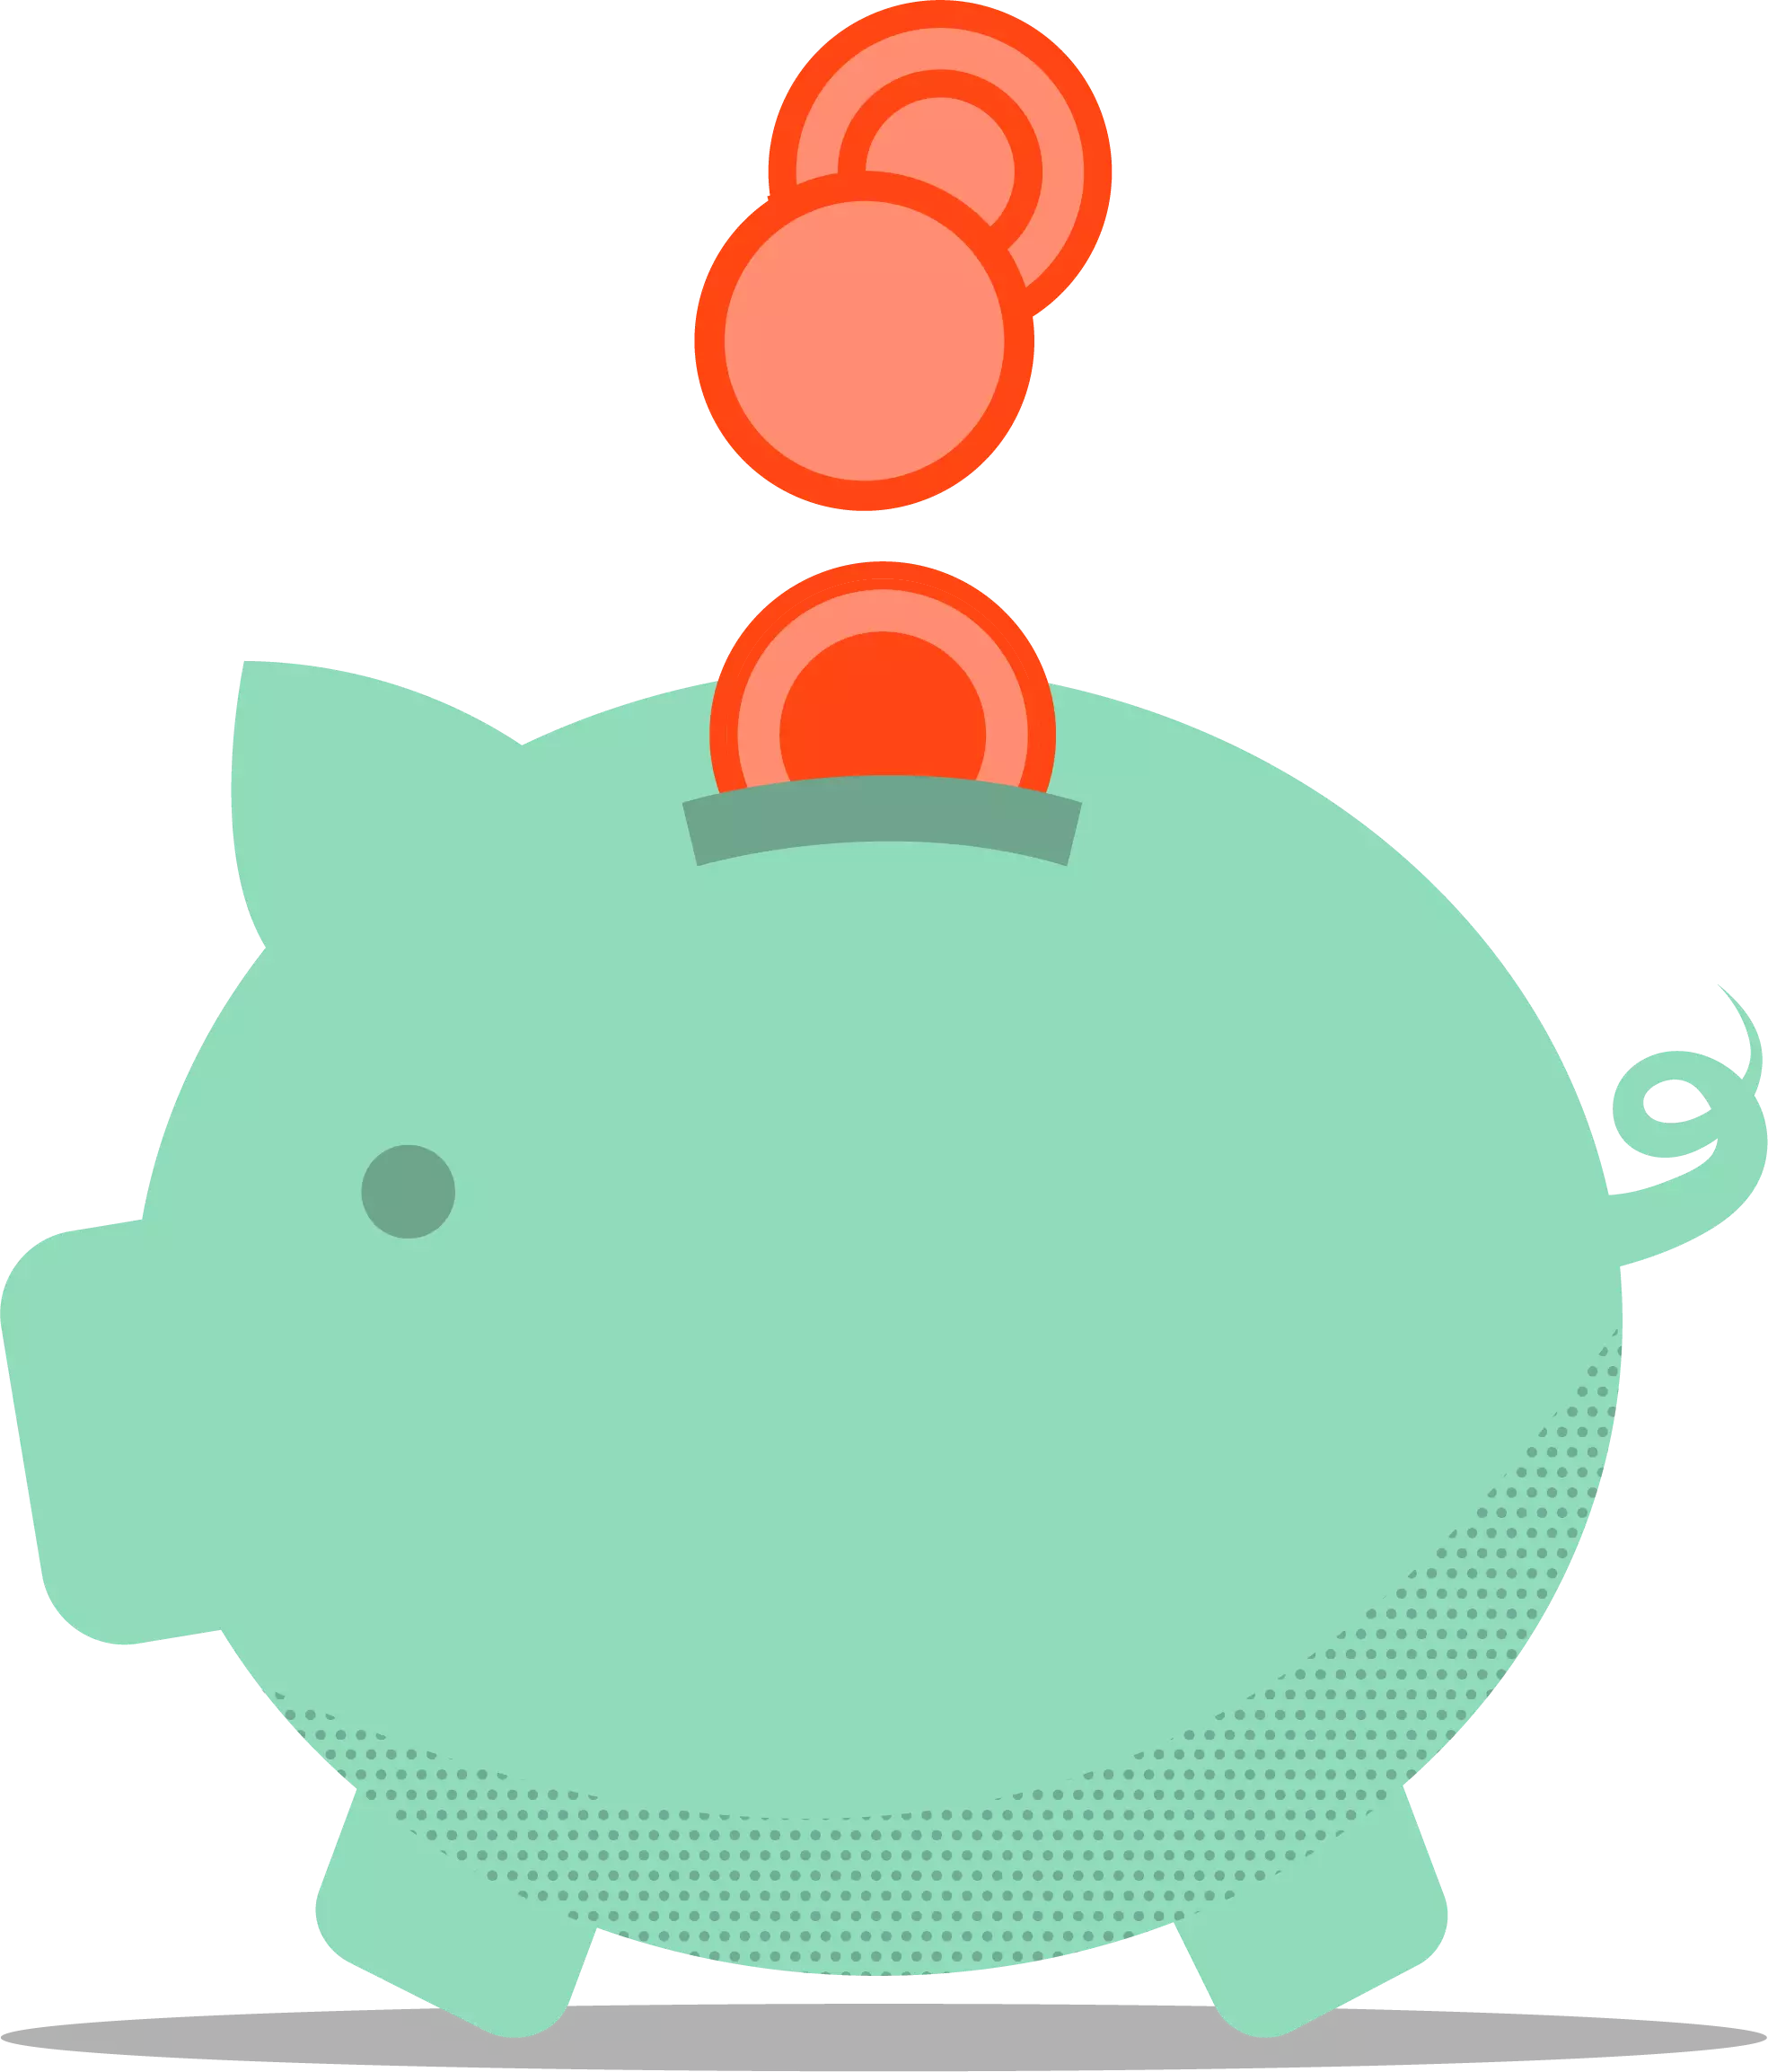 A green piggy bank with orange coins falling into it